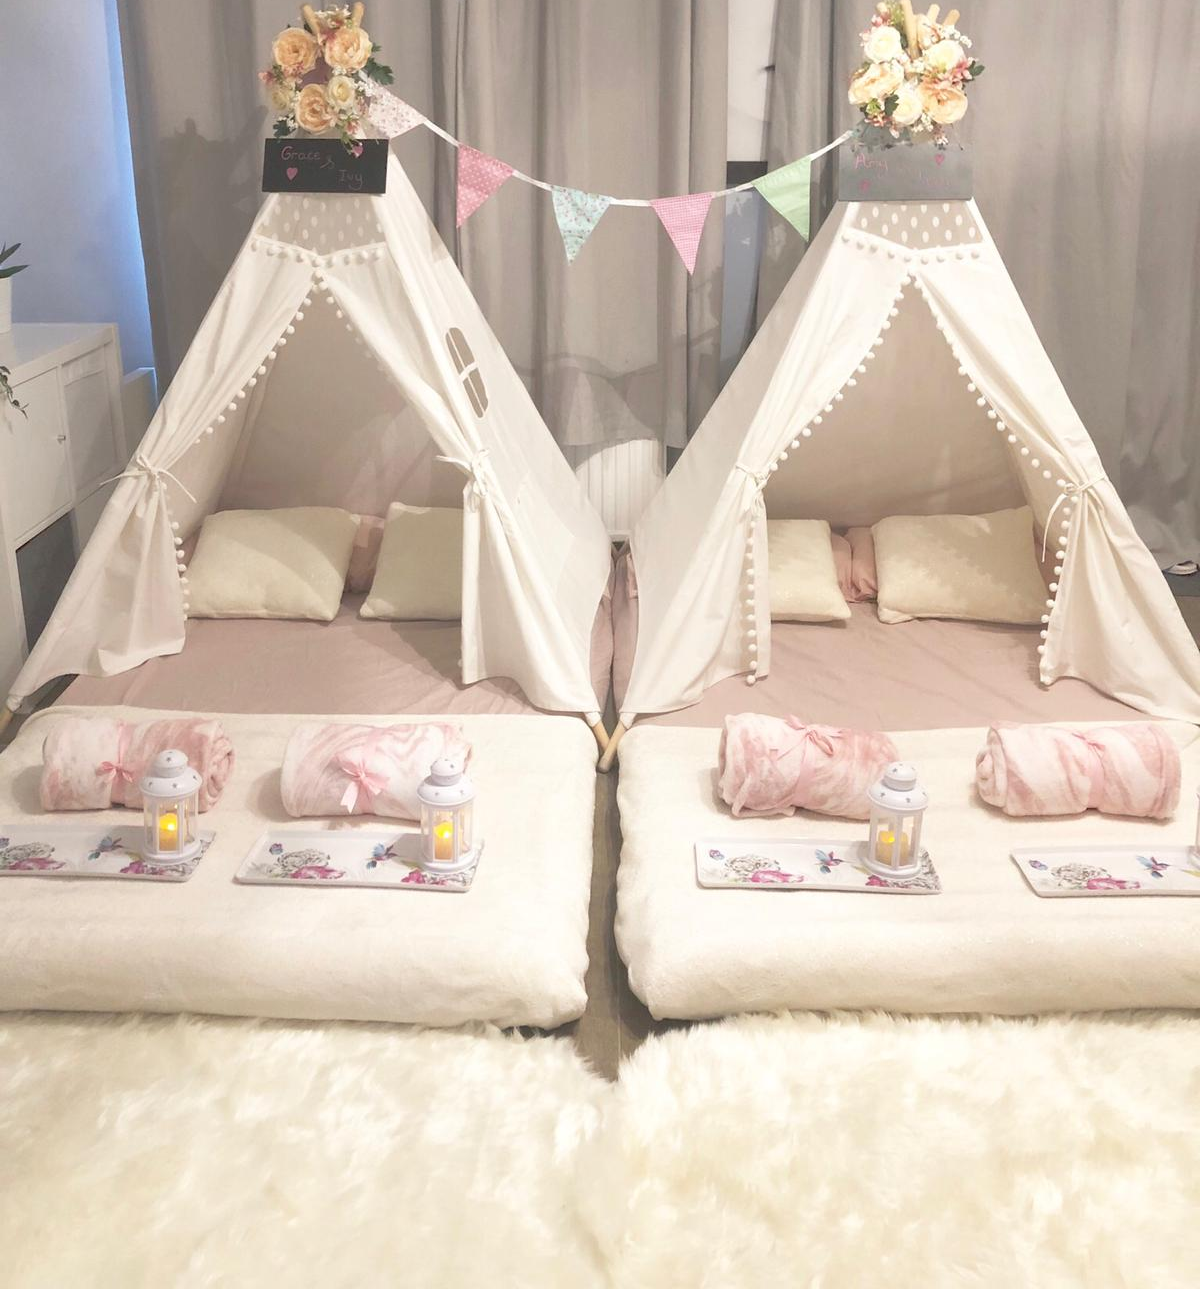 Love and Laugh Parties 2 person adult teepees teepee to hire themed sleepover party Tilehurst Reading Berkshire, Oxfordshire, Hampshire